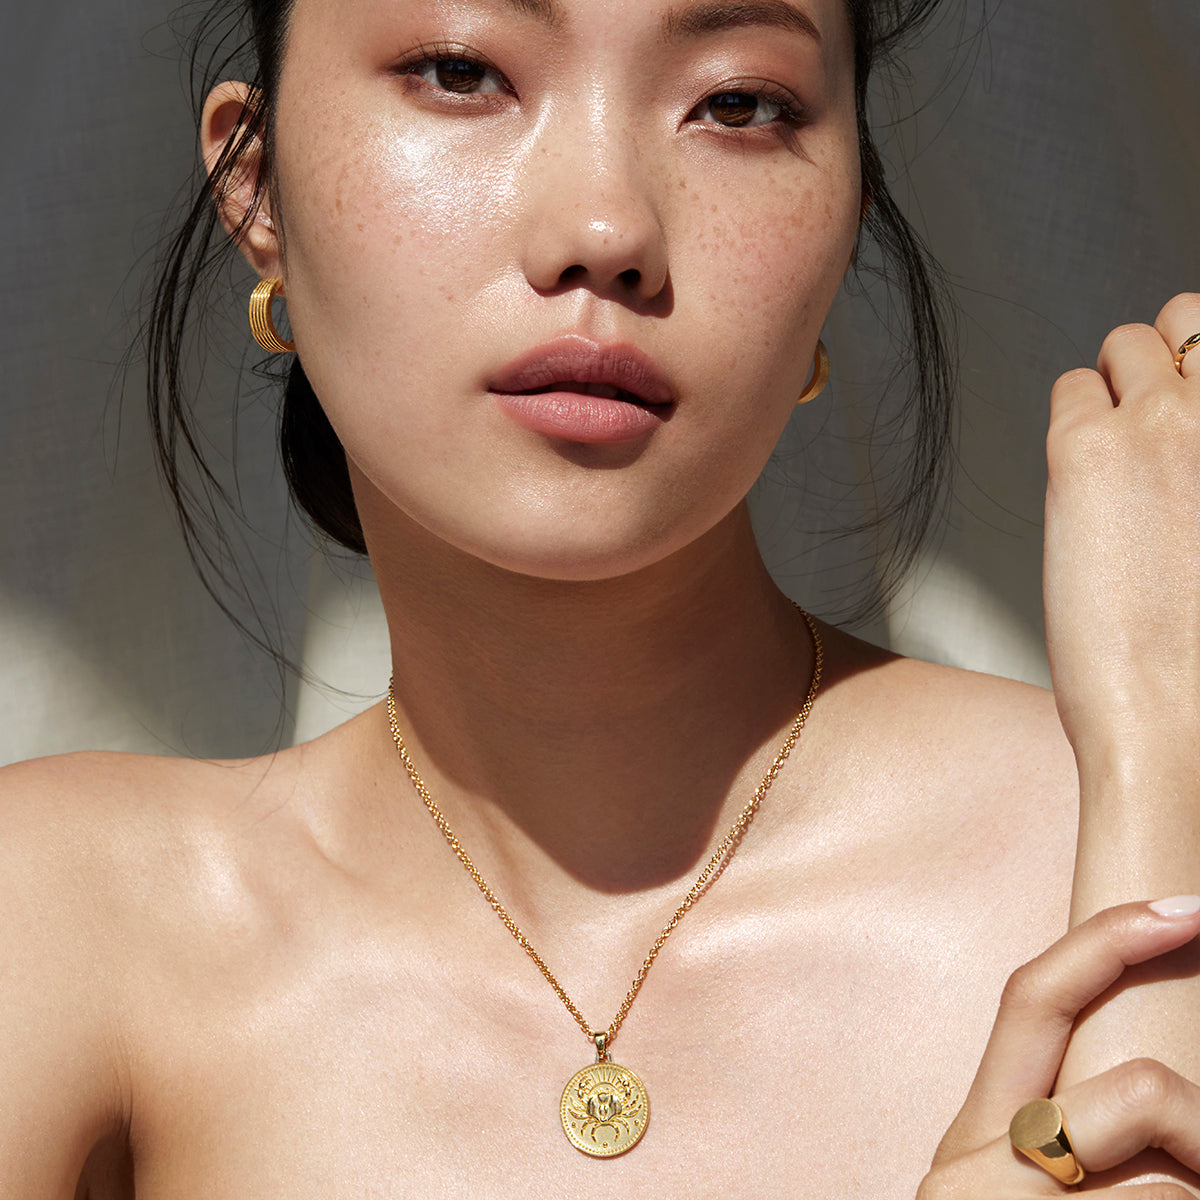 Woman Facing the Camera Wearing Cancer Ethical Gold Pendant and Ethical Gold Chain 